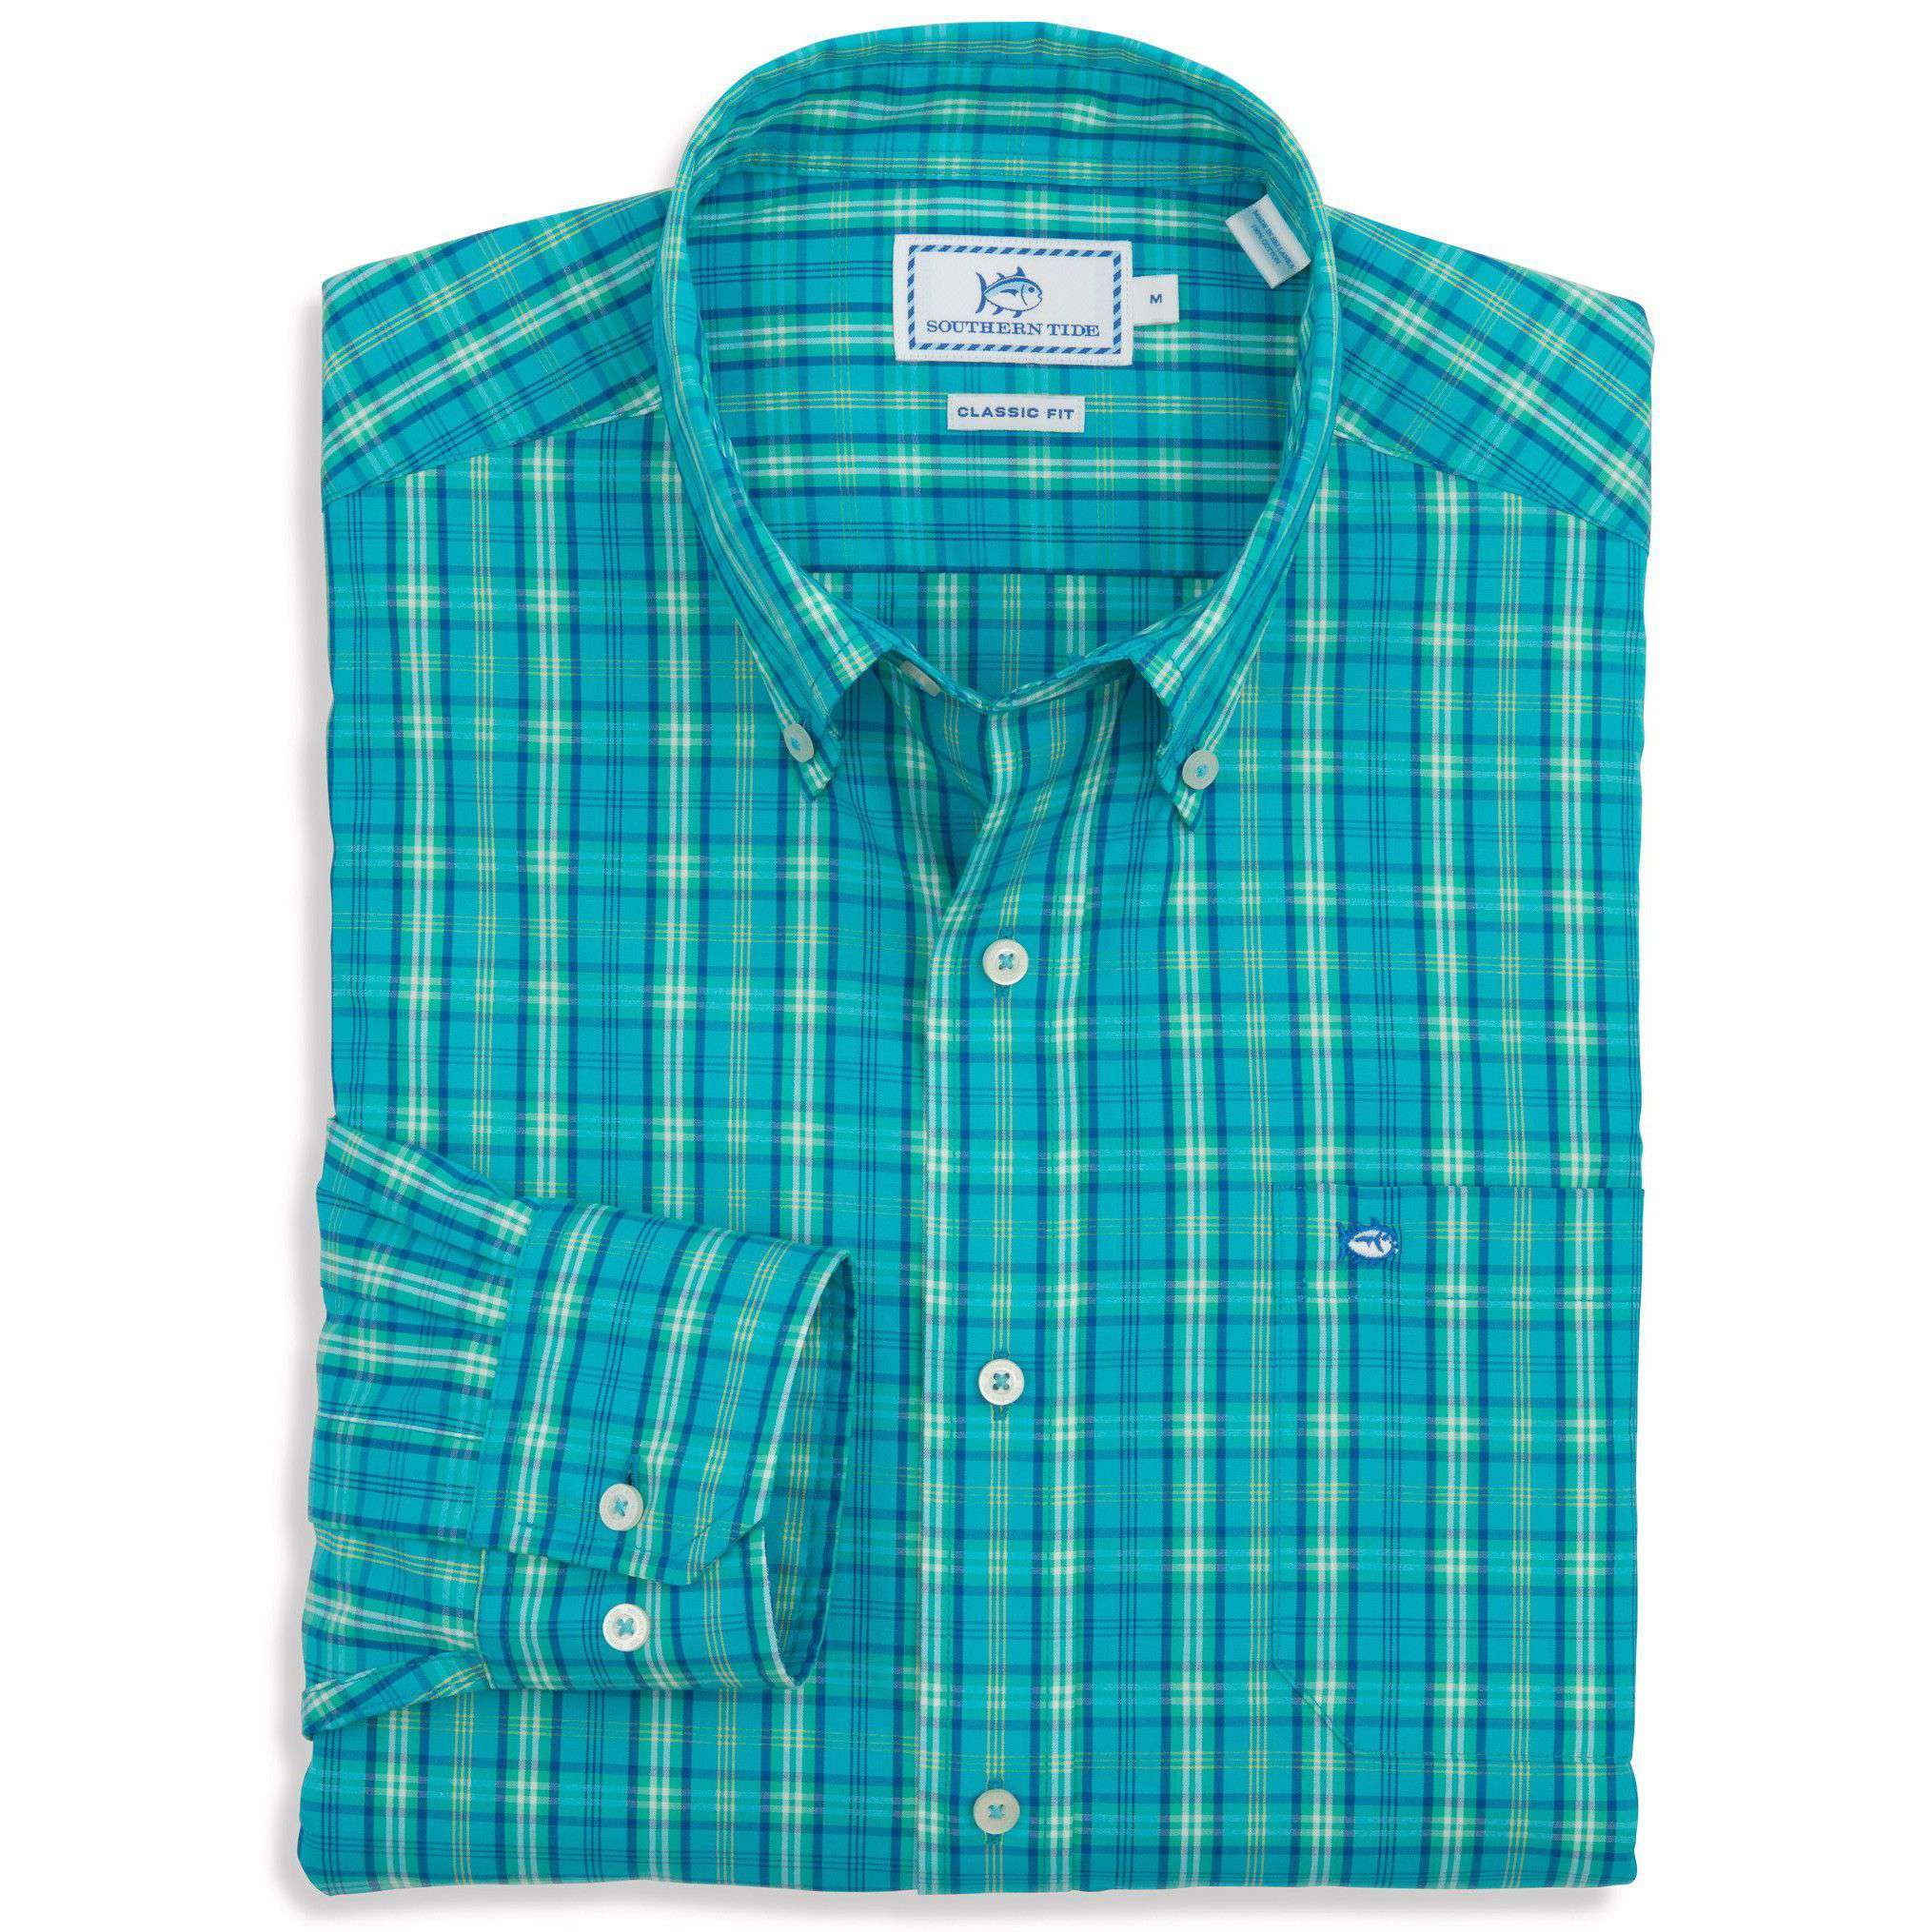 Wentworth Plaid Sport Shirt in Scuba Blue by Southern Tide - Country Club Prep